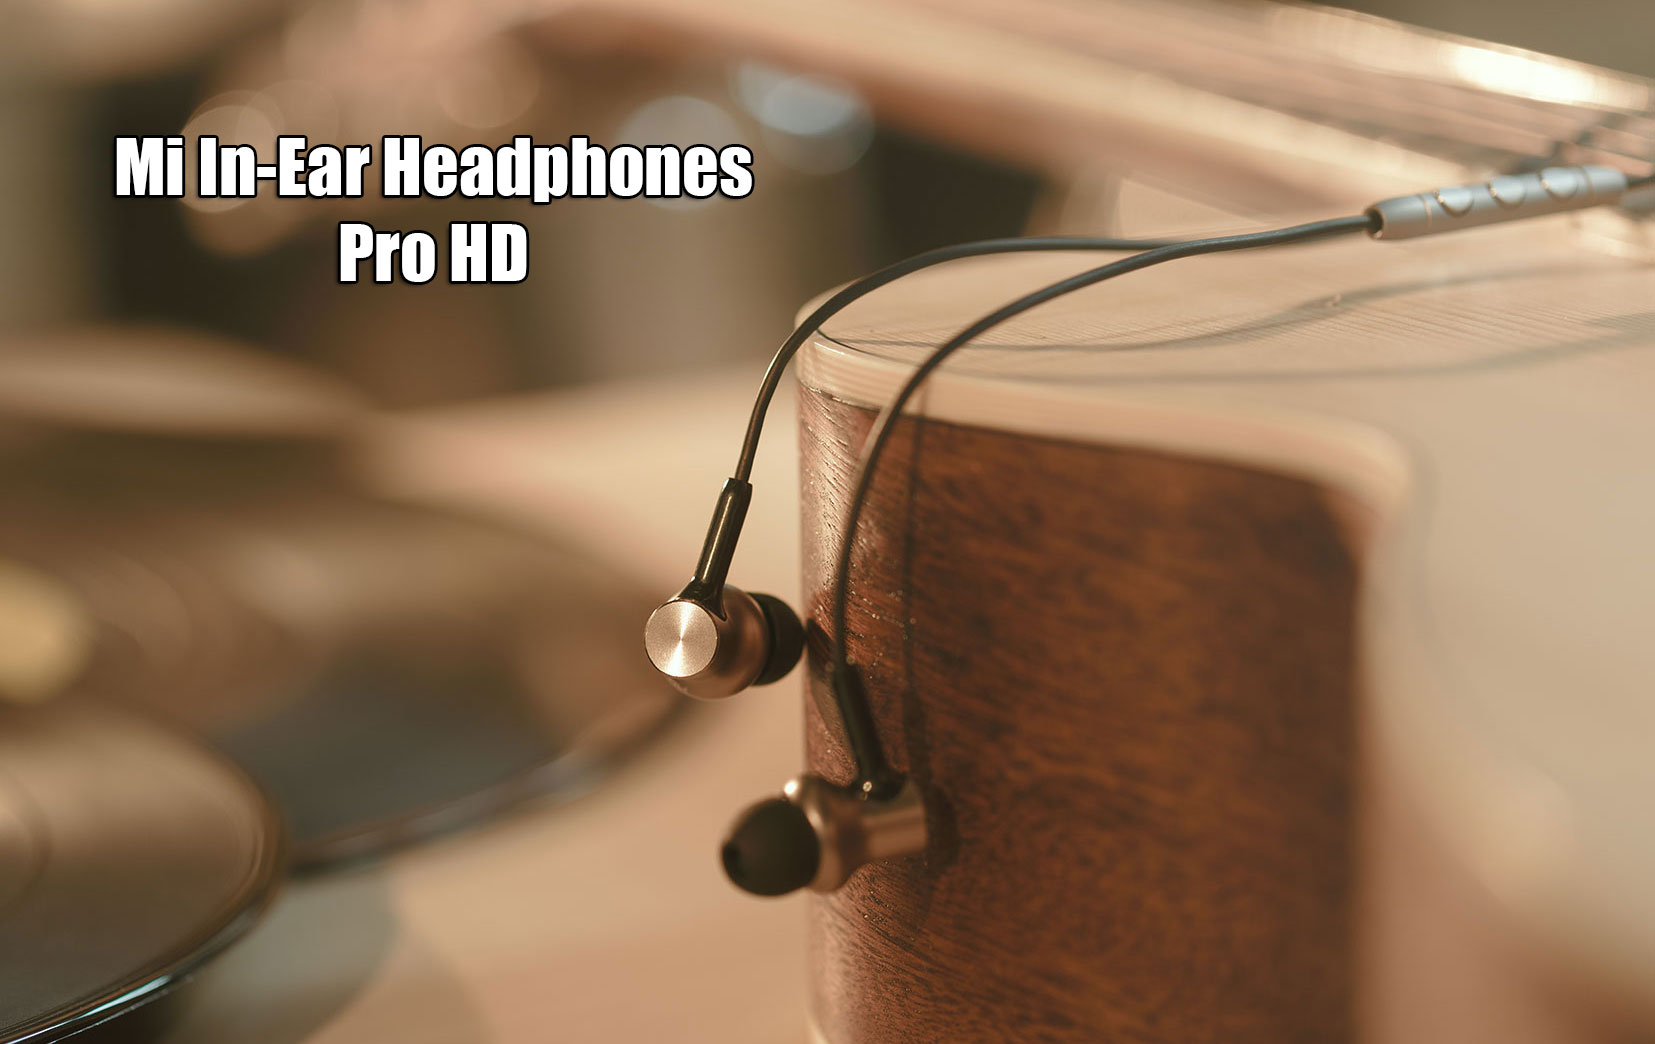 Mi In-Ear Headphones Pro HD launched in India for Rs 1,999